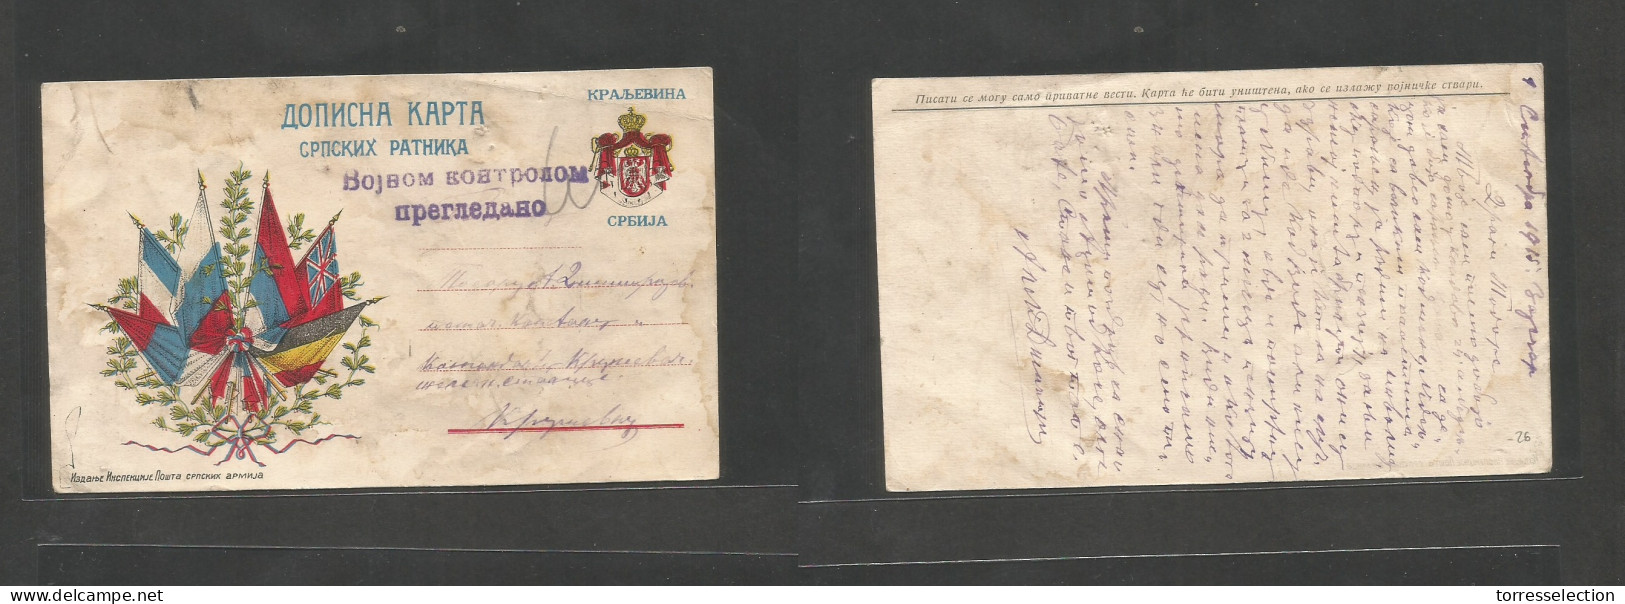 MILITARY MAIL. 1915 (1 Oct) Bagerap - Kleracby. Military FM Color Flags Card. Neat Censor Cachet With Text. Fine. - Poste Militaire (PM)